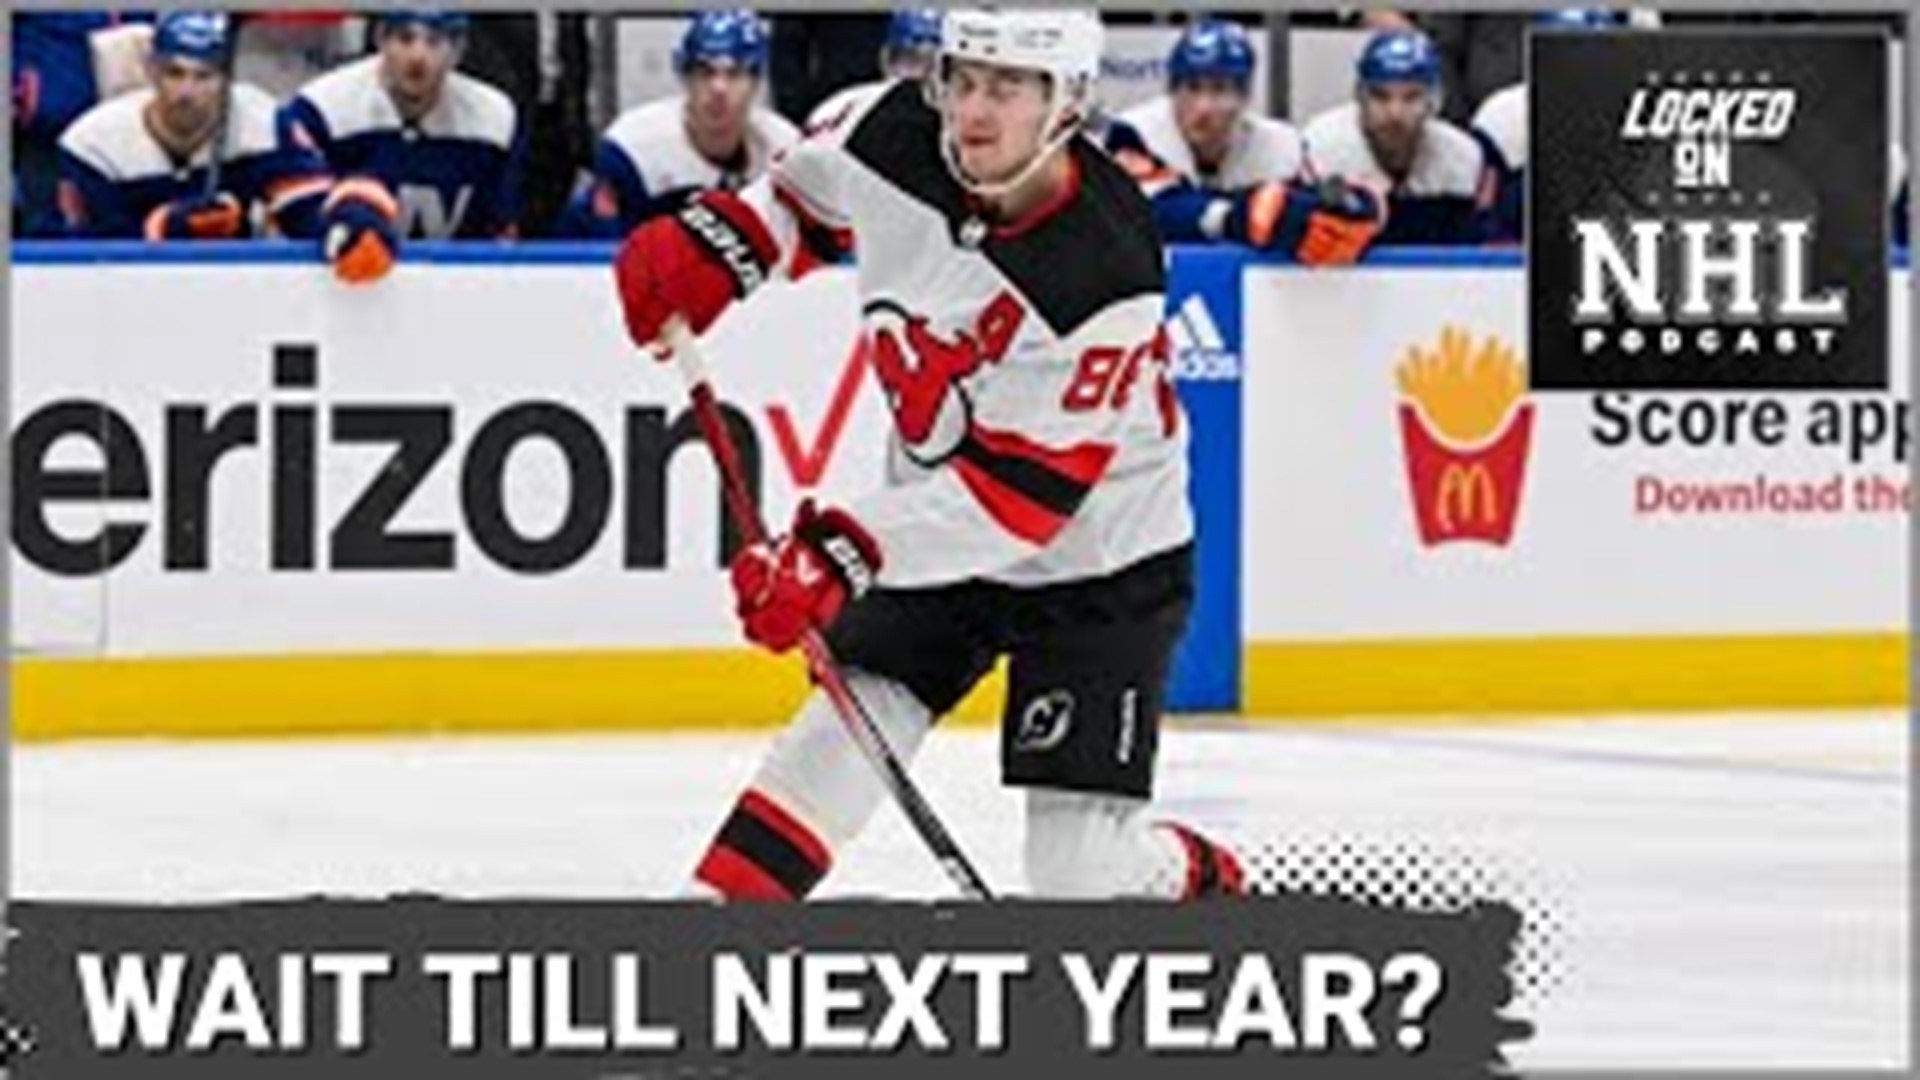 The New Jersey Devils have won three of their last four games but still need a miracle finish to make the Stanley Cup Playoffs.